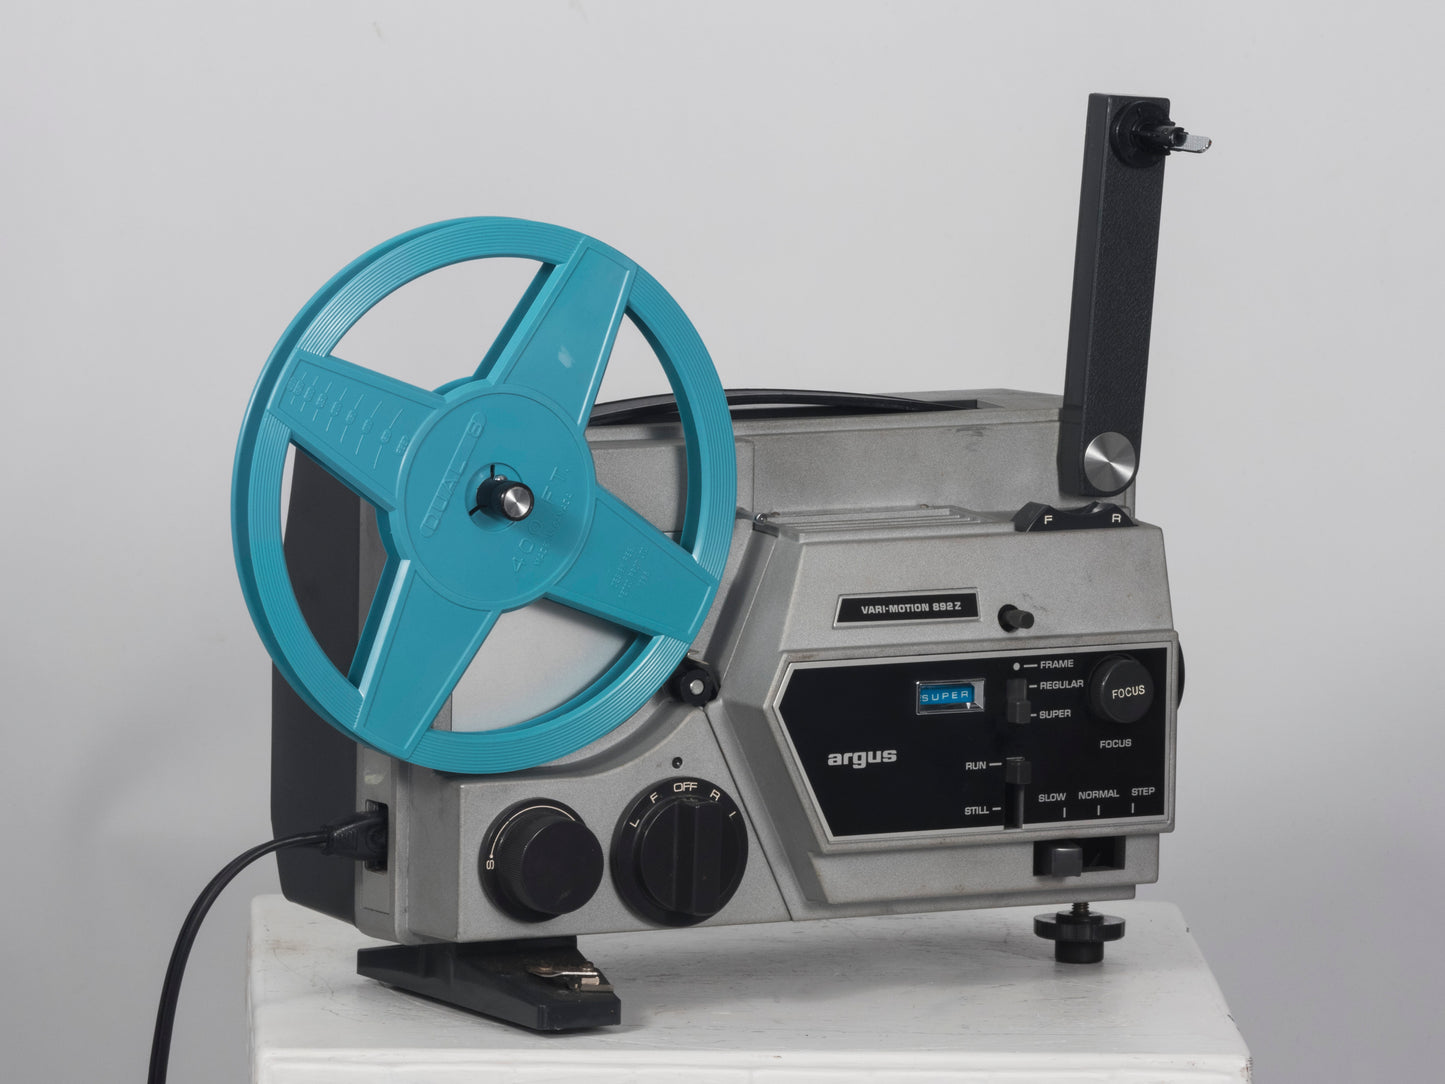 Argus Vari-Motion 892Z 8mm and Super 8 projector